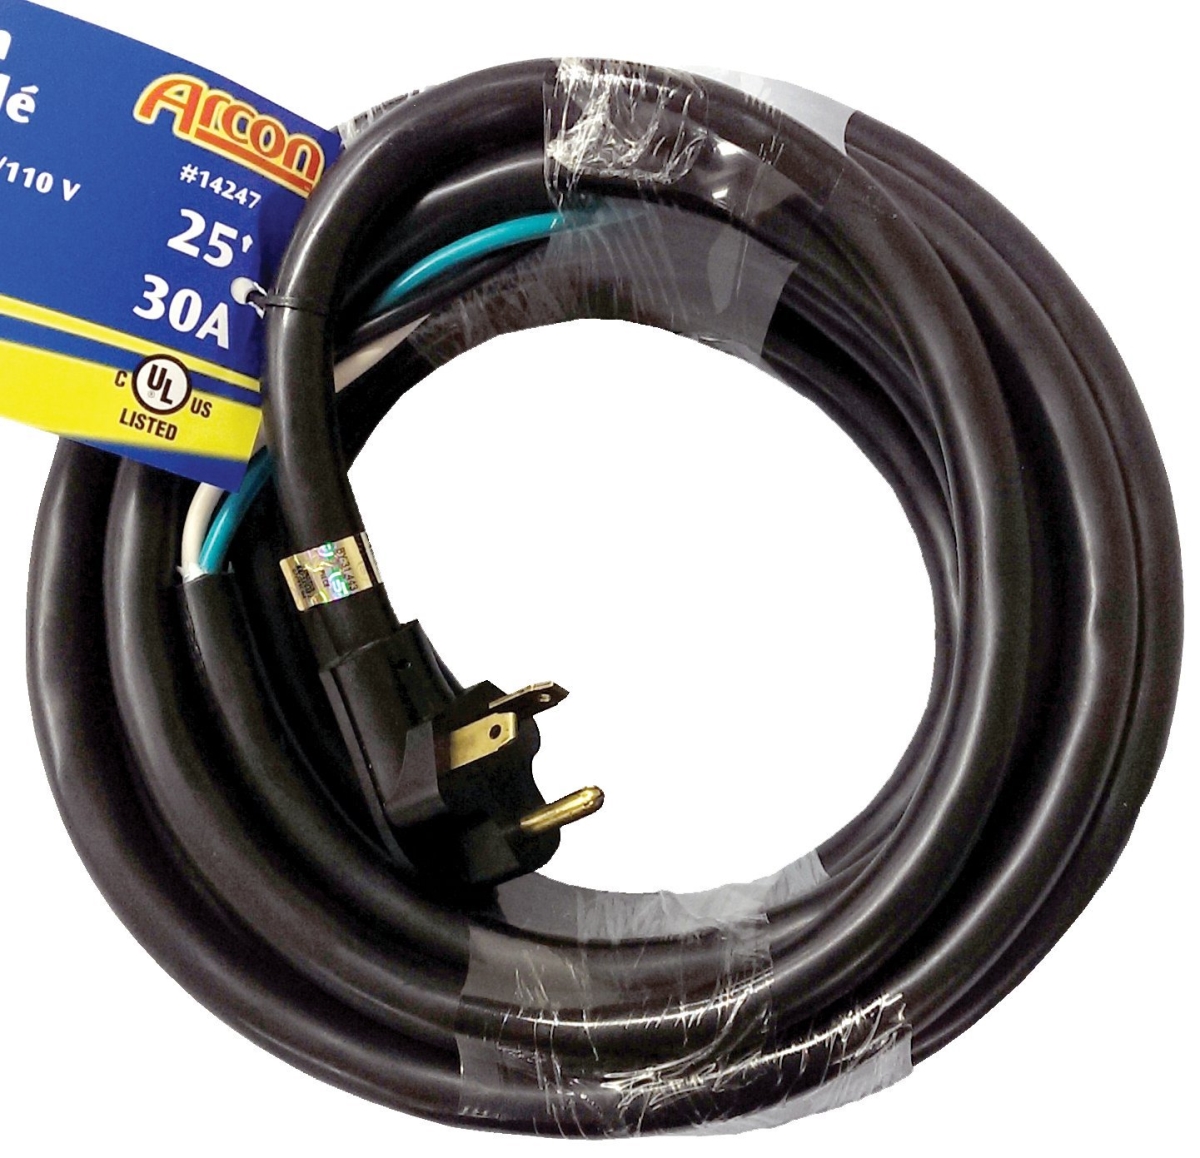 Arc-14247 25 Ft. 30 A Male Stripped Power Cord